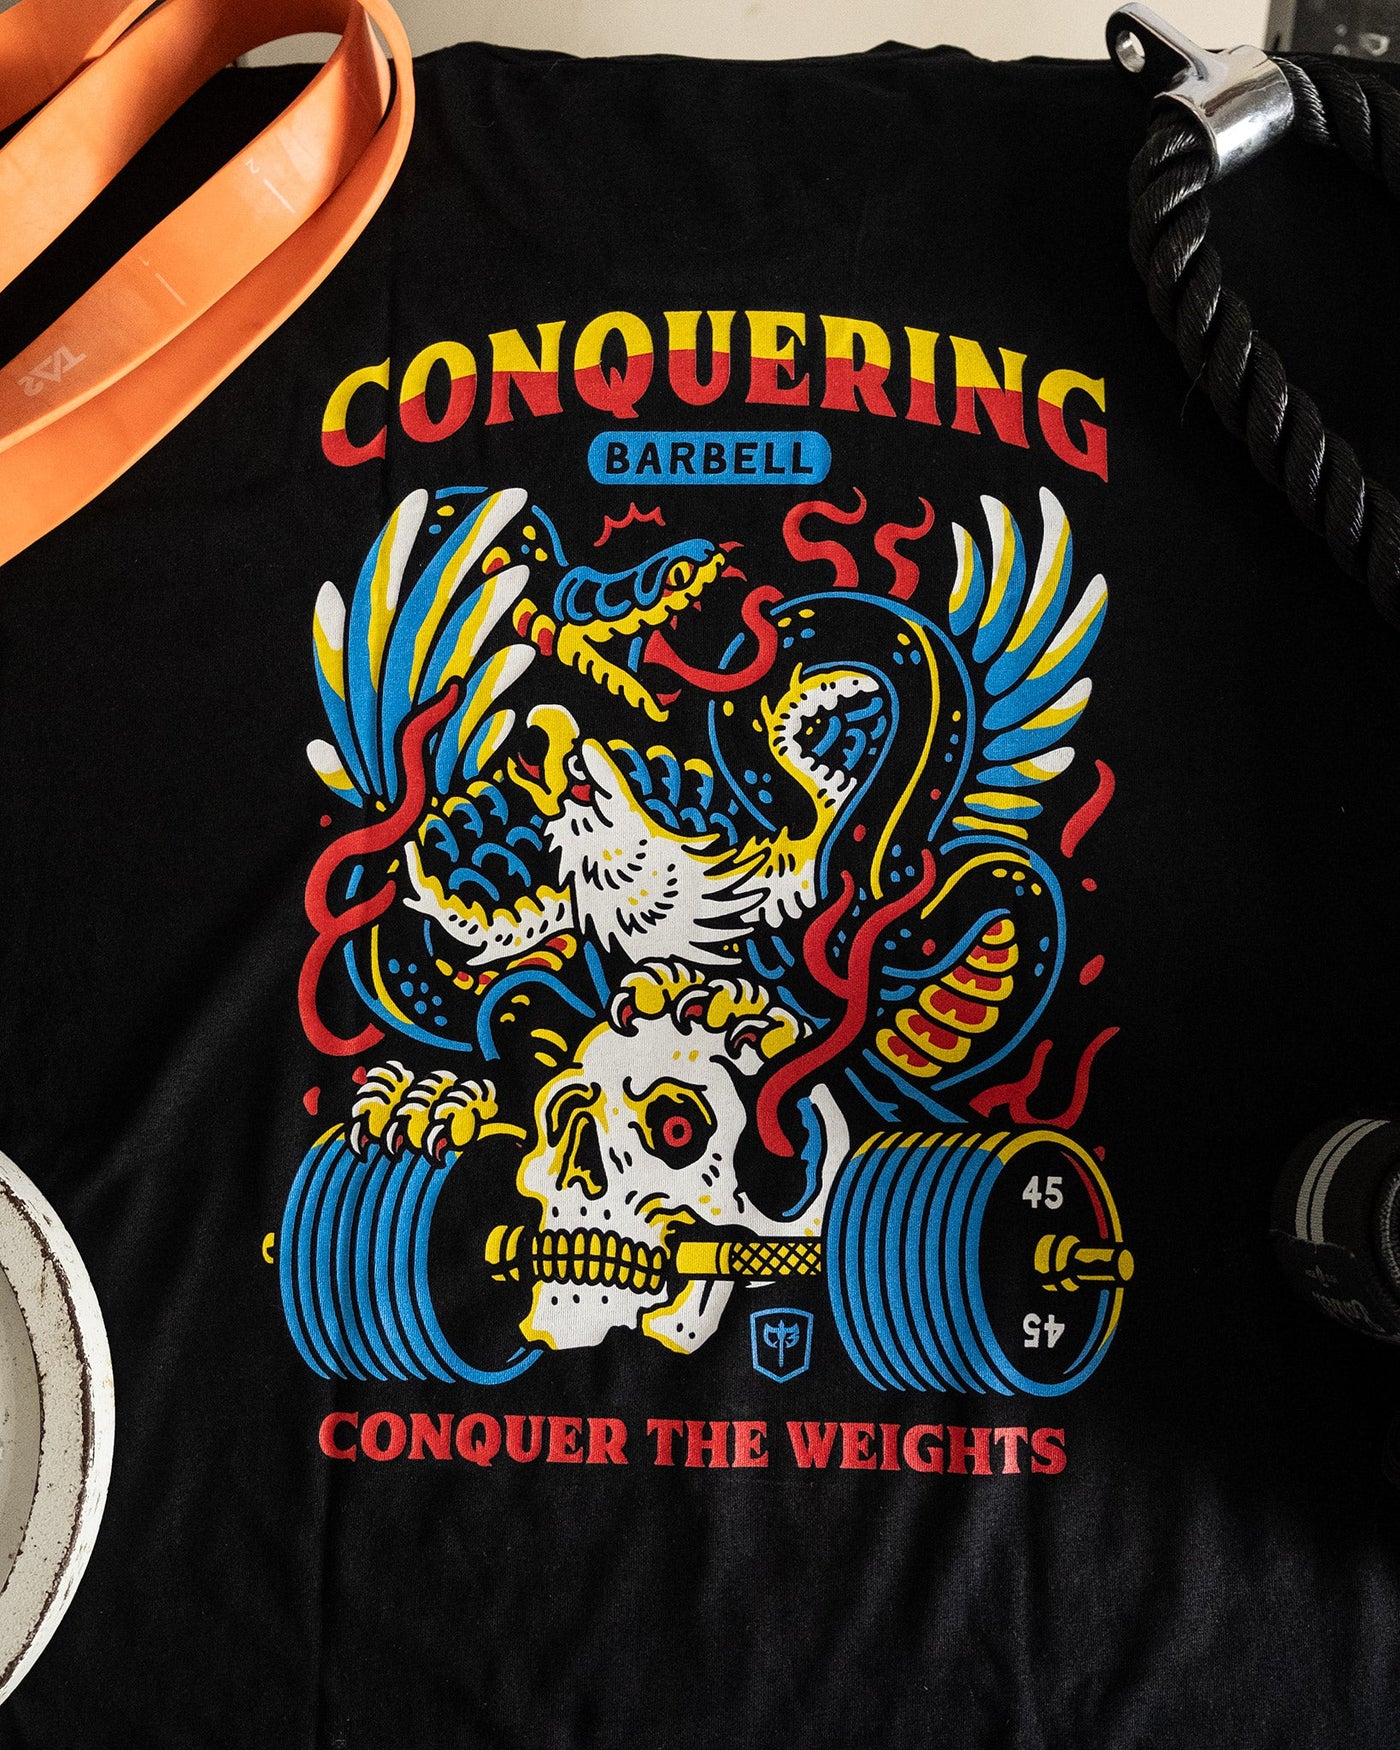 Conquer The Weights - Air Raid - Black Tee - Conquering Barbell